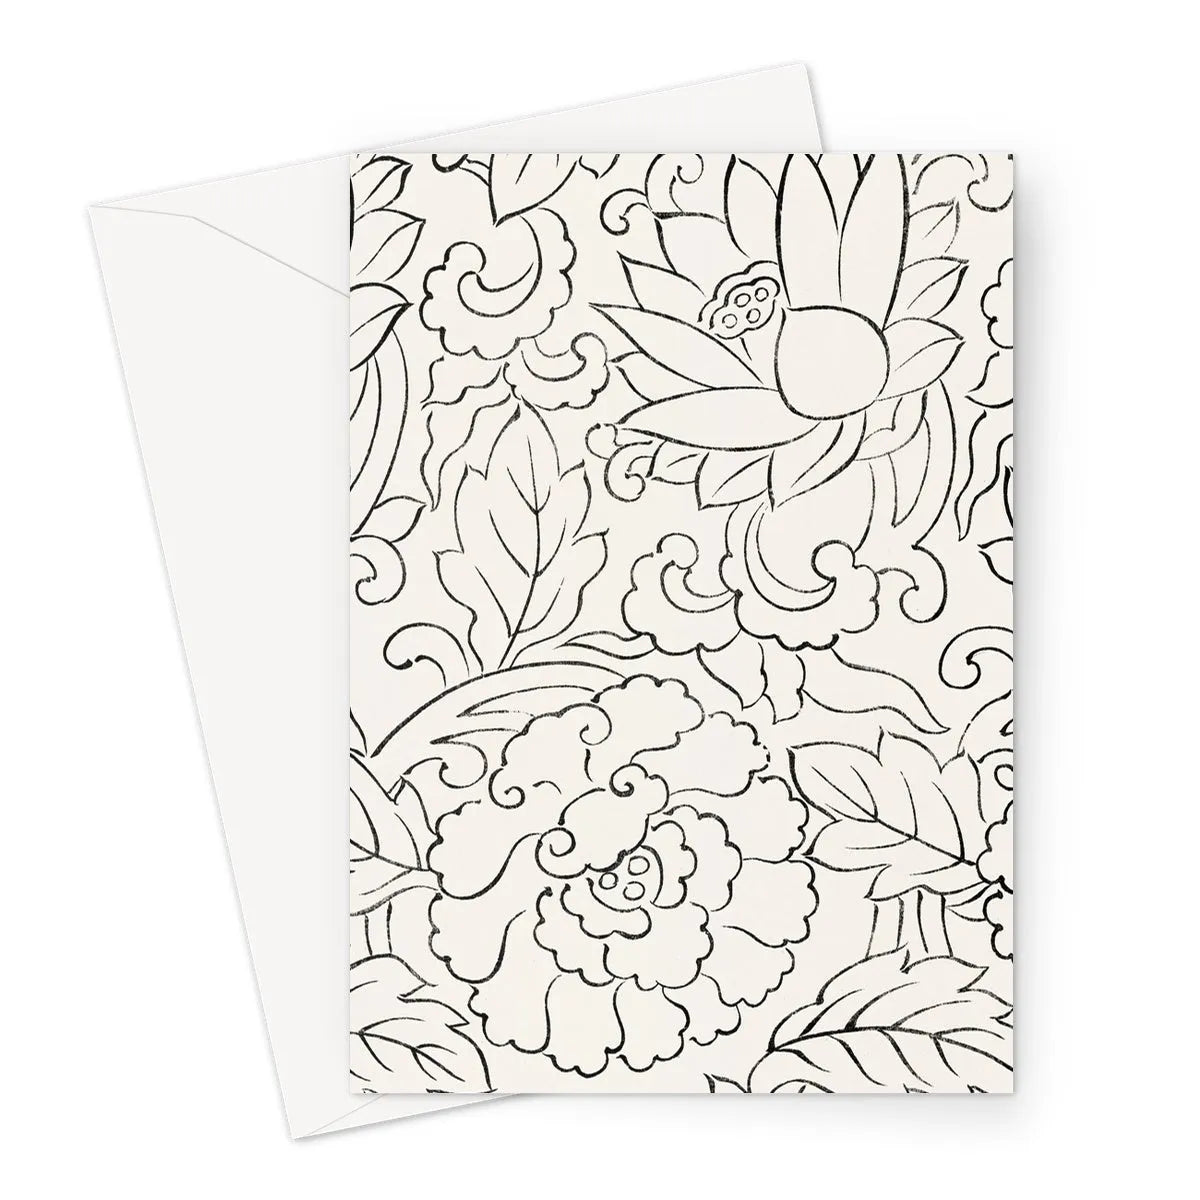 Black x White Floral Woodblock Print By Taguchi Tomoki Greeting Card - A5 Portrait / 1 Card - Notebooks & Notepads